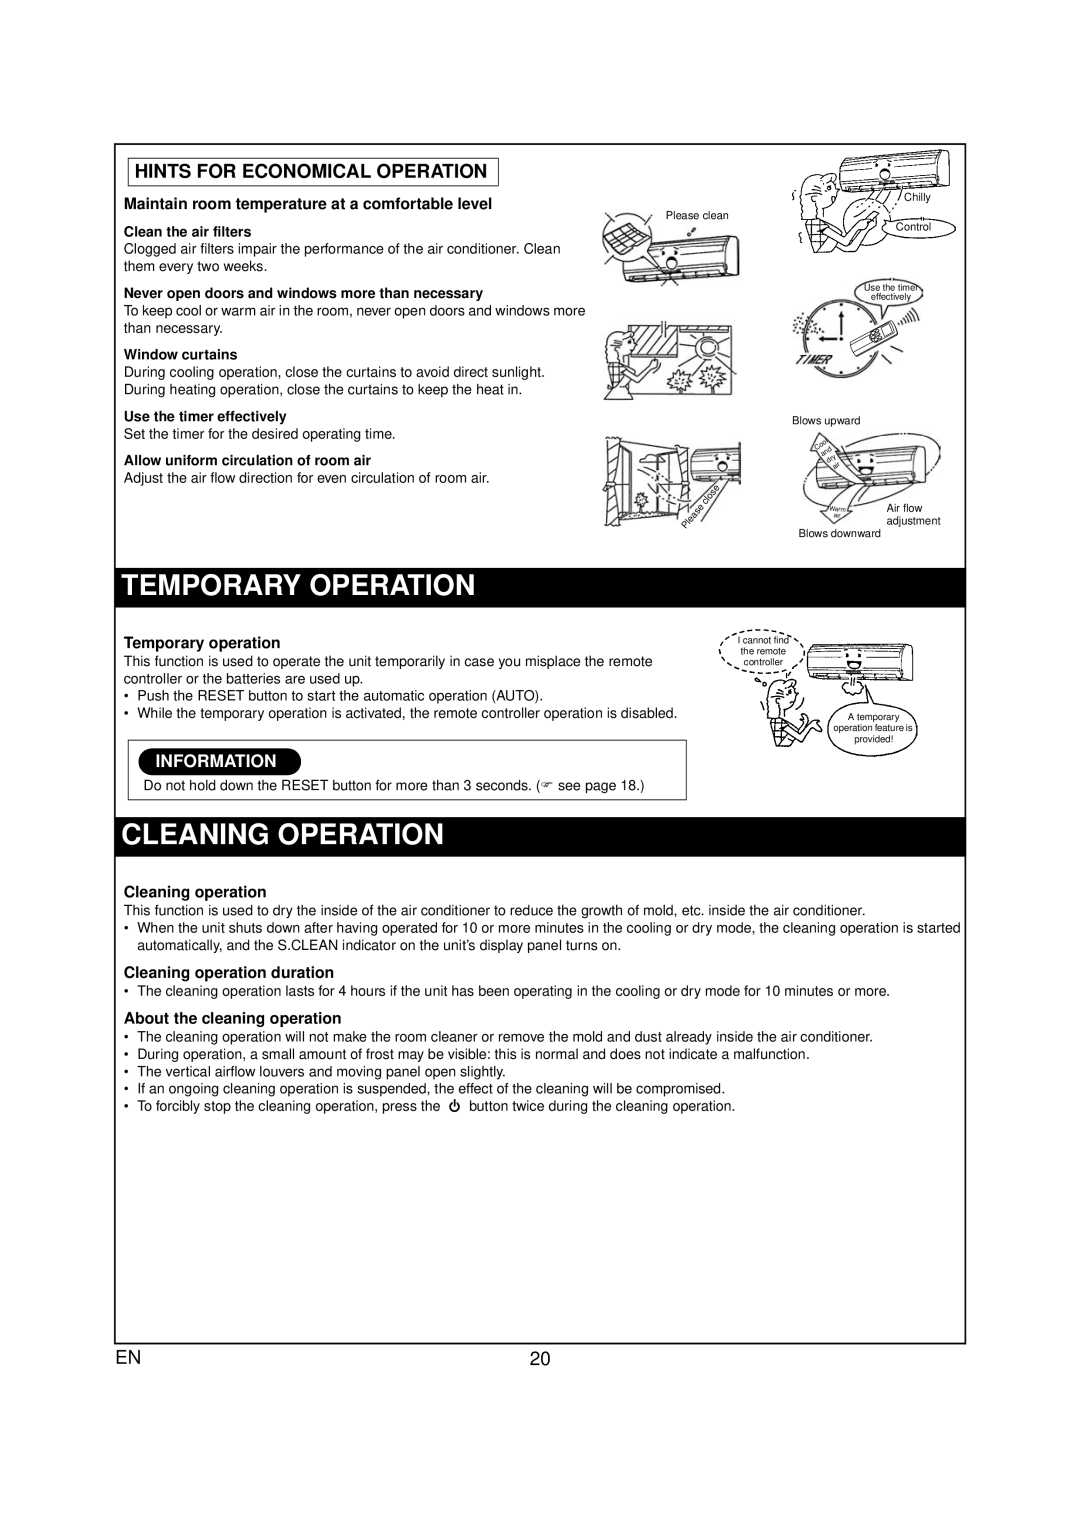 Toshiba RAS-07PKVP-E Temporary Operation, Cleaning Operation, Hints For Economical Operation, Information, Window curtains 